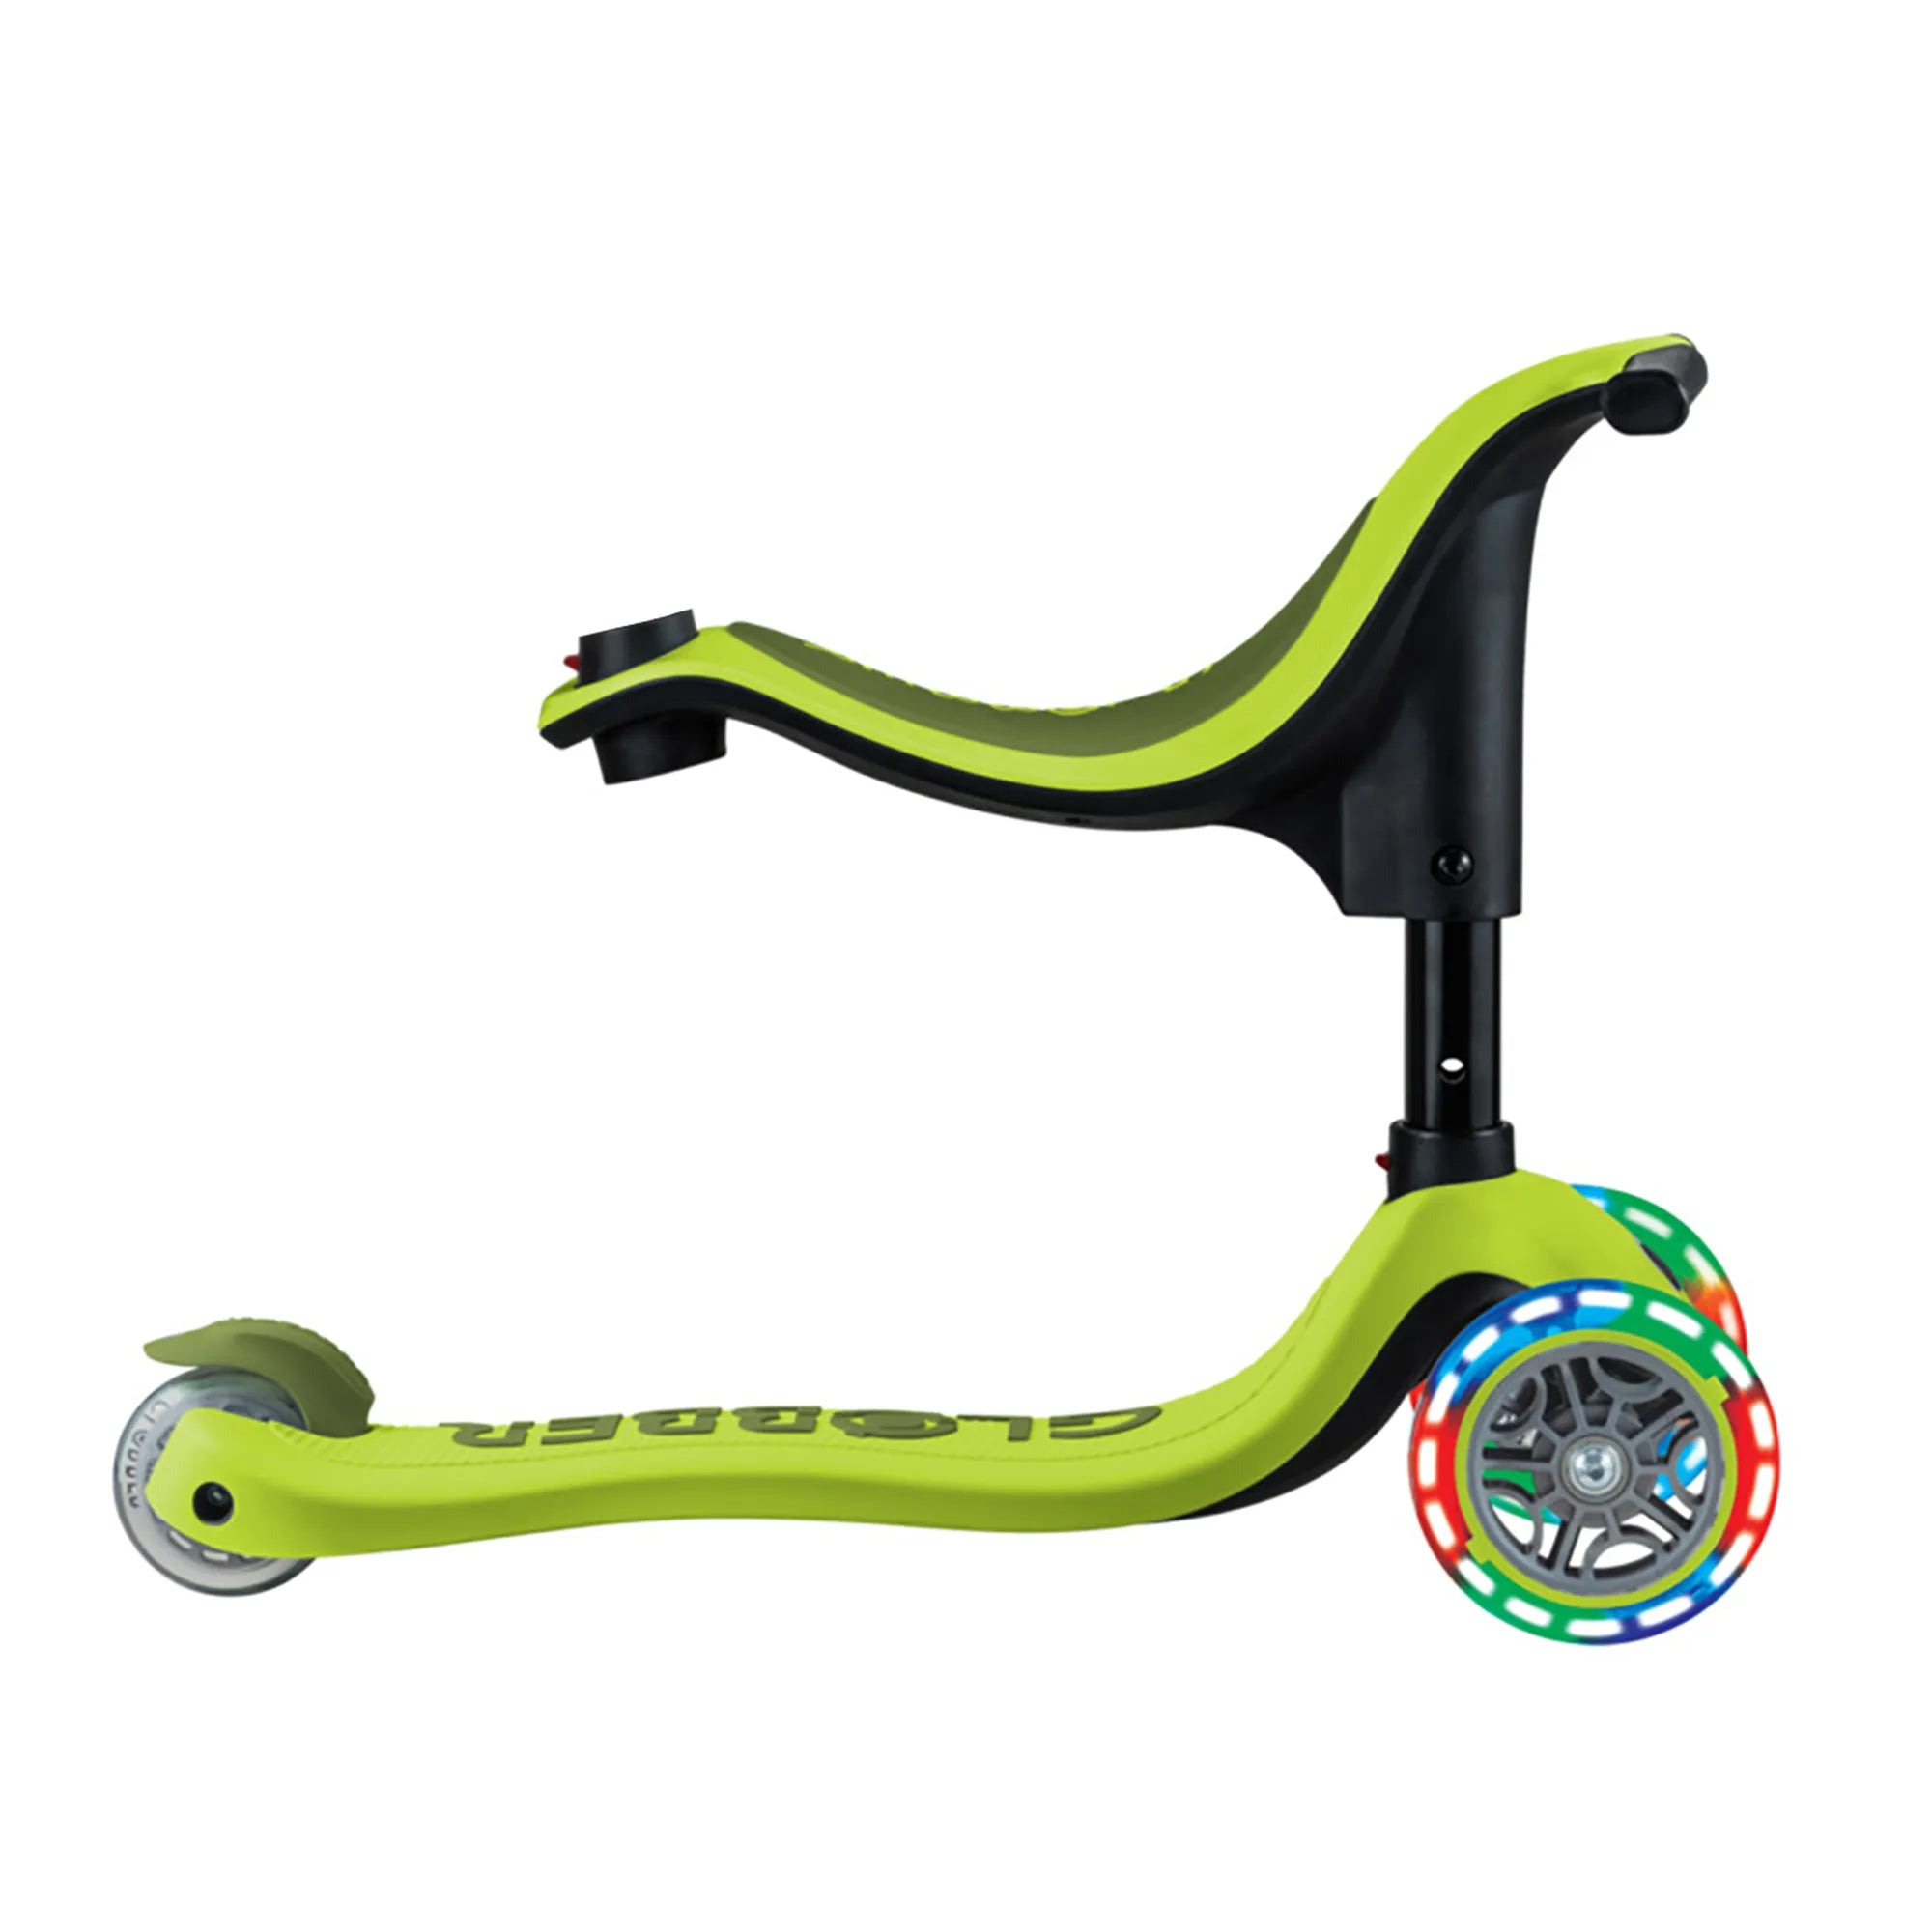 Globber GO•UP Sporty Lights - Lime Green & Khaki Green - Award-Winning Fun - Ages 15m-7+ yrs - Brown's Hobby & Game